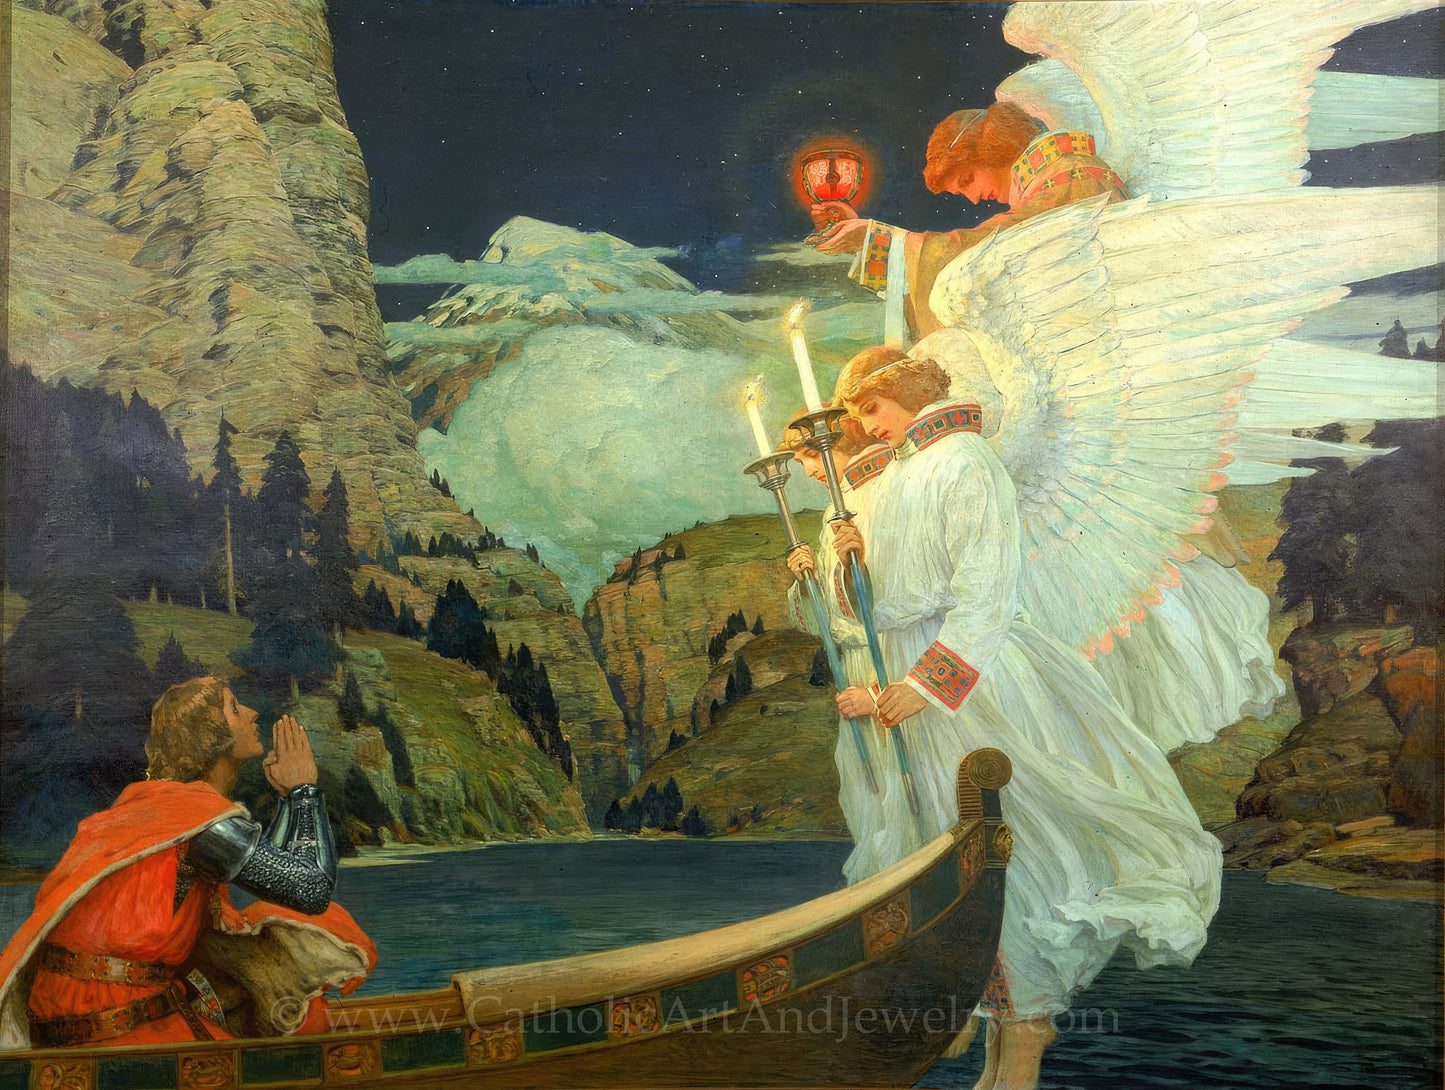 New! The Holy Grail – Frederick J. Waugh – "The Knight of the Holy Grail" – Catholic Art Print – Catholic Theme